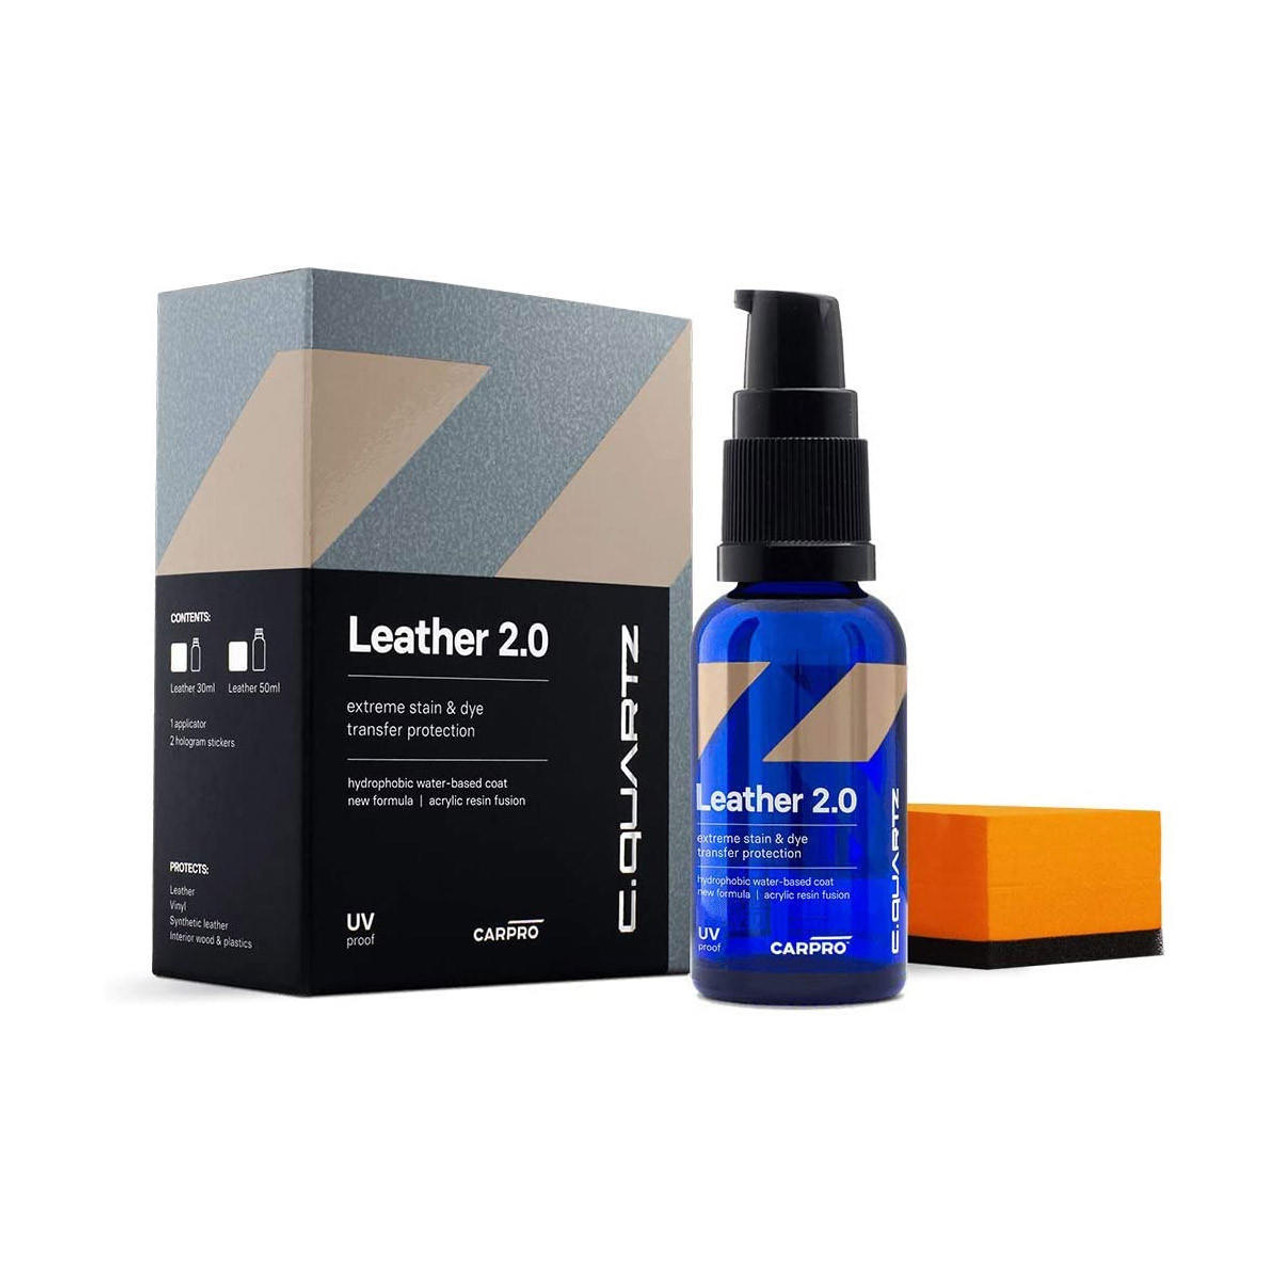 Leather Master Leather Repair Filler Plus - Leather Master UK